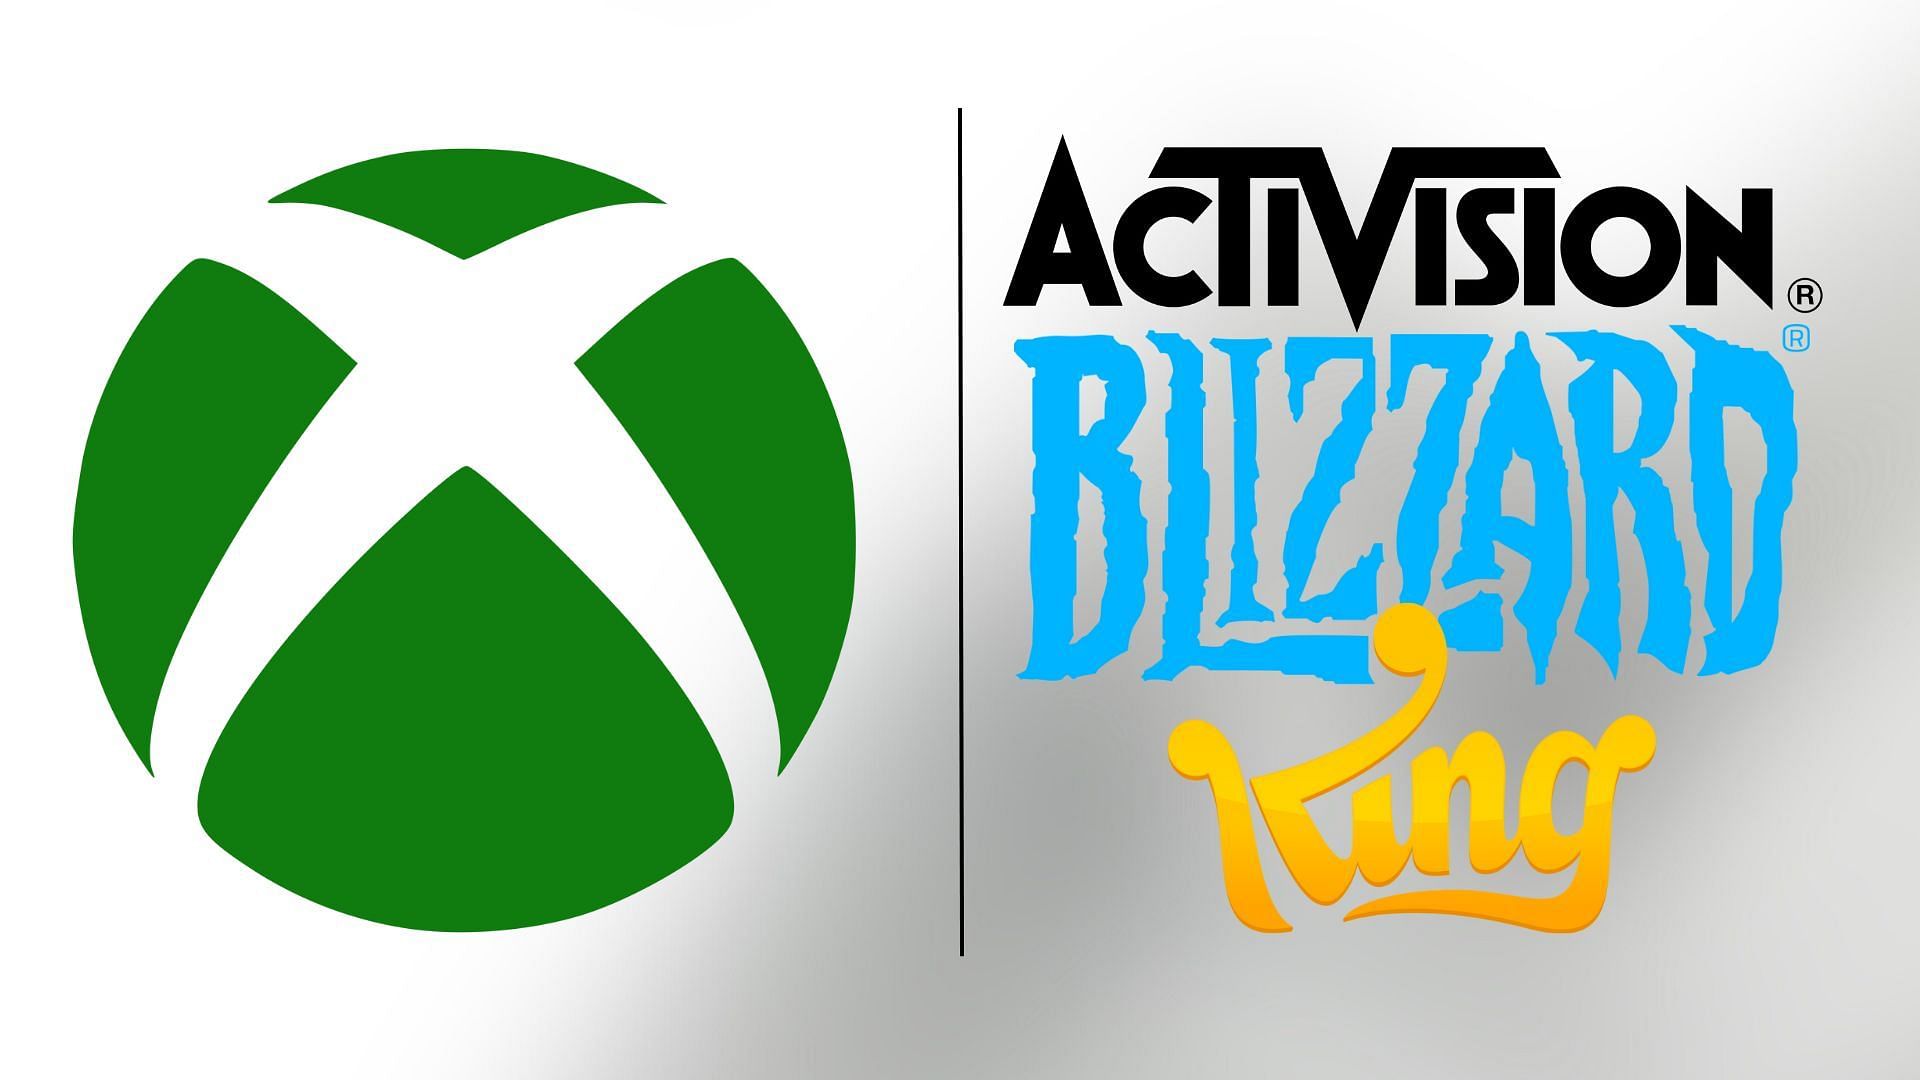 The Microsoft Activision acquisition is progressing swiftly (Image via Microsoft and Activision)